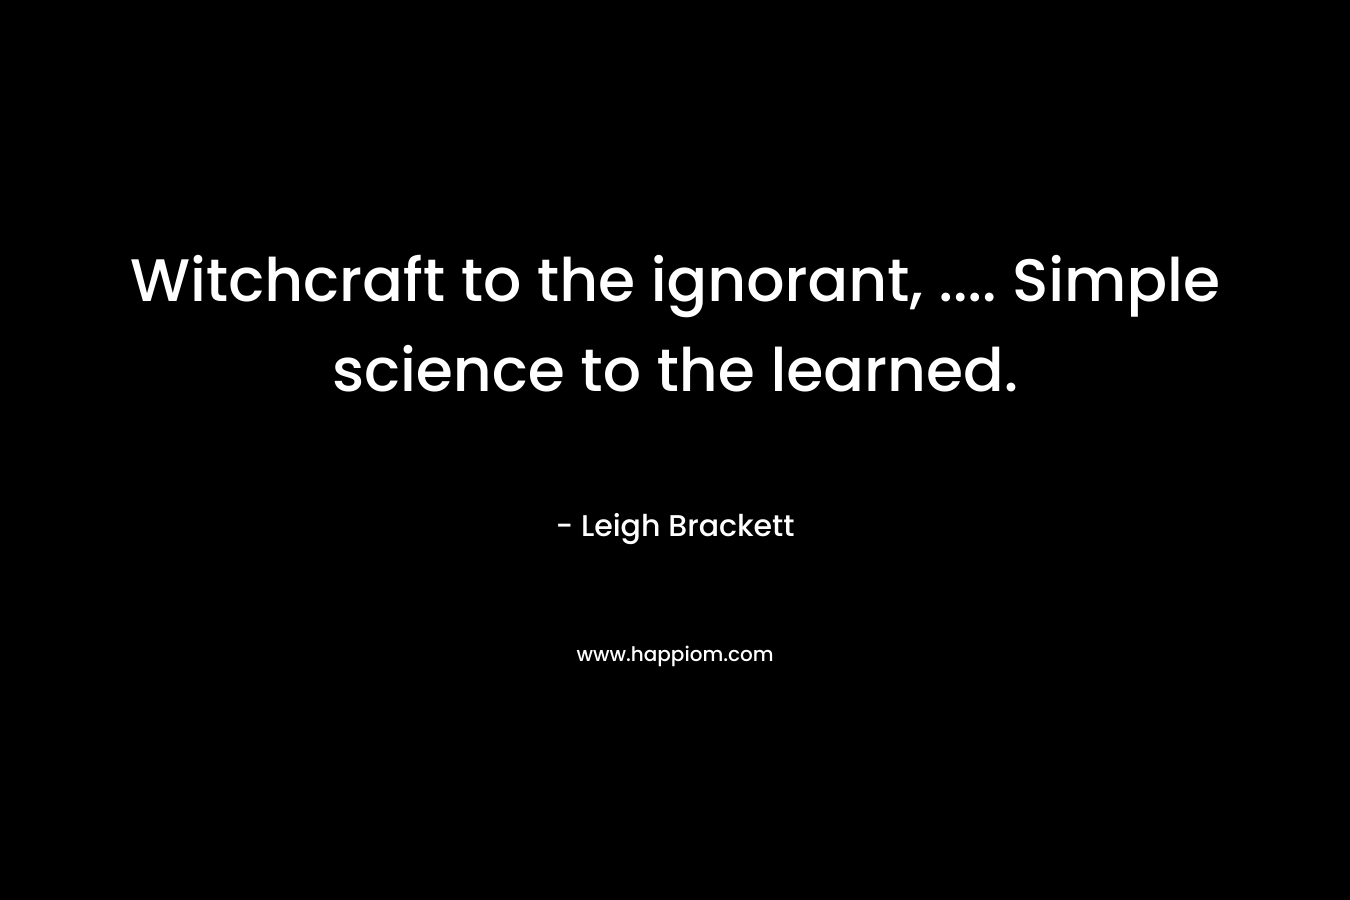 Witchcraft to the ignorant, …. Simple science to the learned. – Leigh Brackett